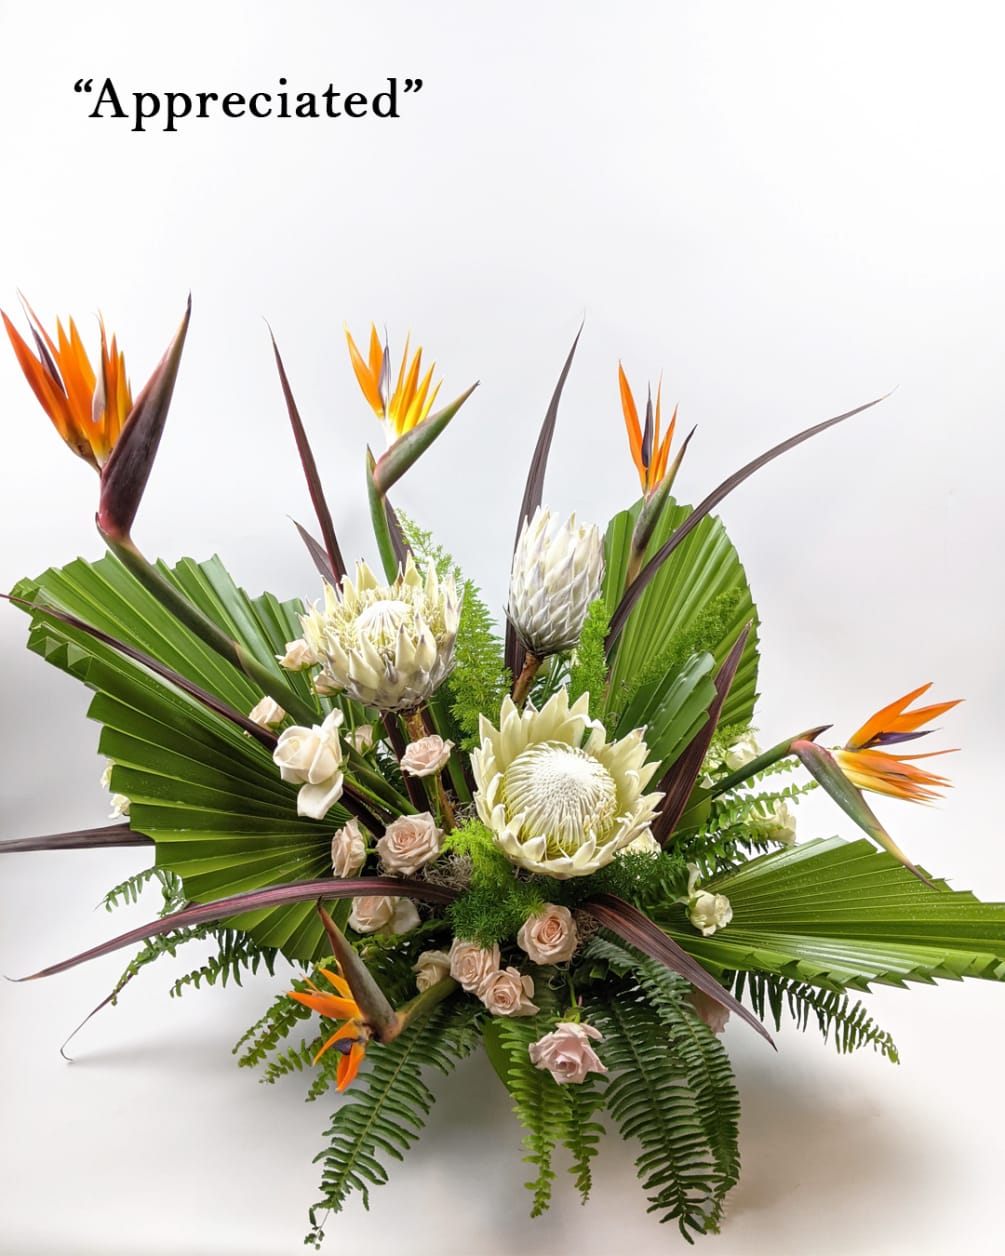 This arrangement must be purchased by phone or using our Custom Arrangements